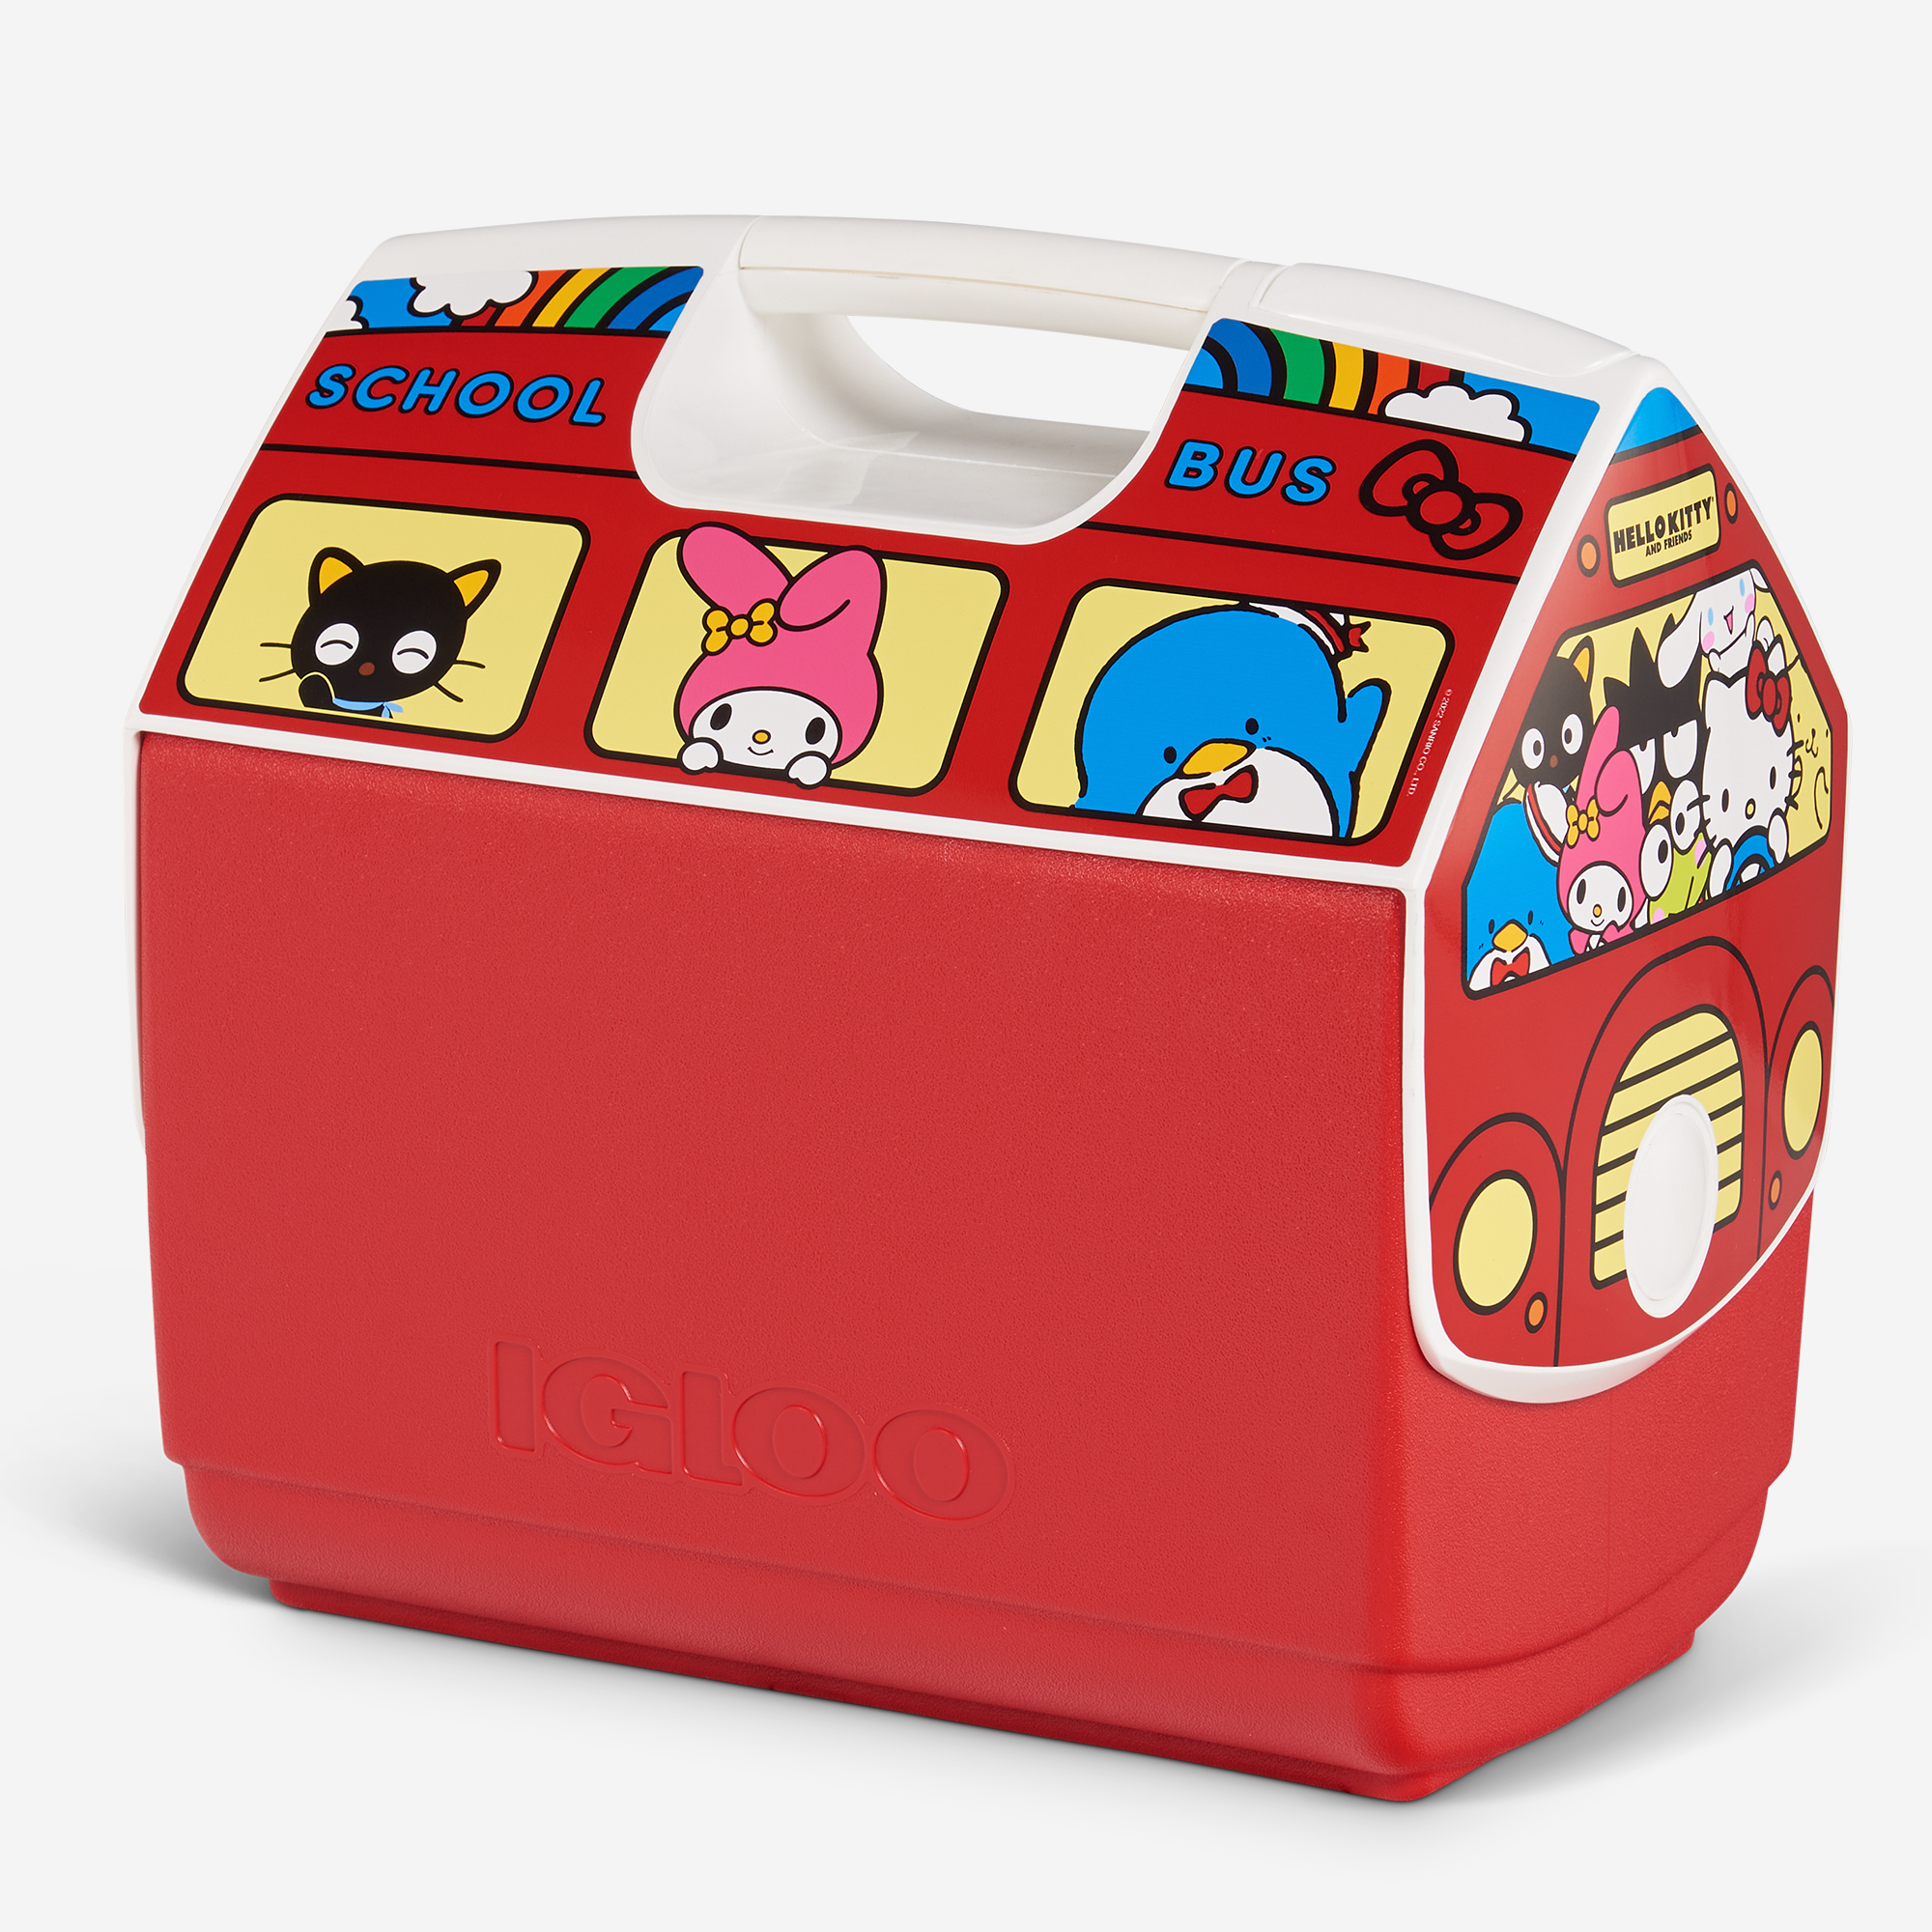 Hello Kitty and Friends x Igloo® School Bus Playmate Elite 16 Qt Cooler Travel Igloo Products Corp   